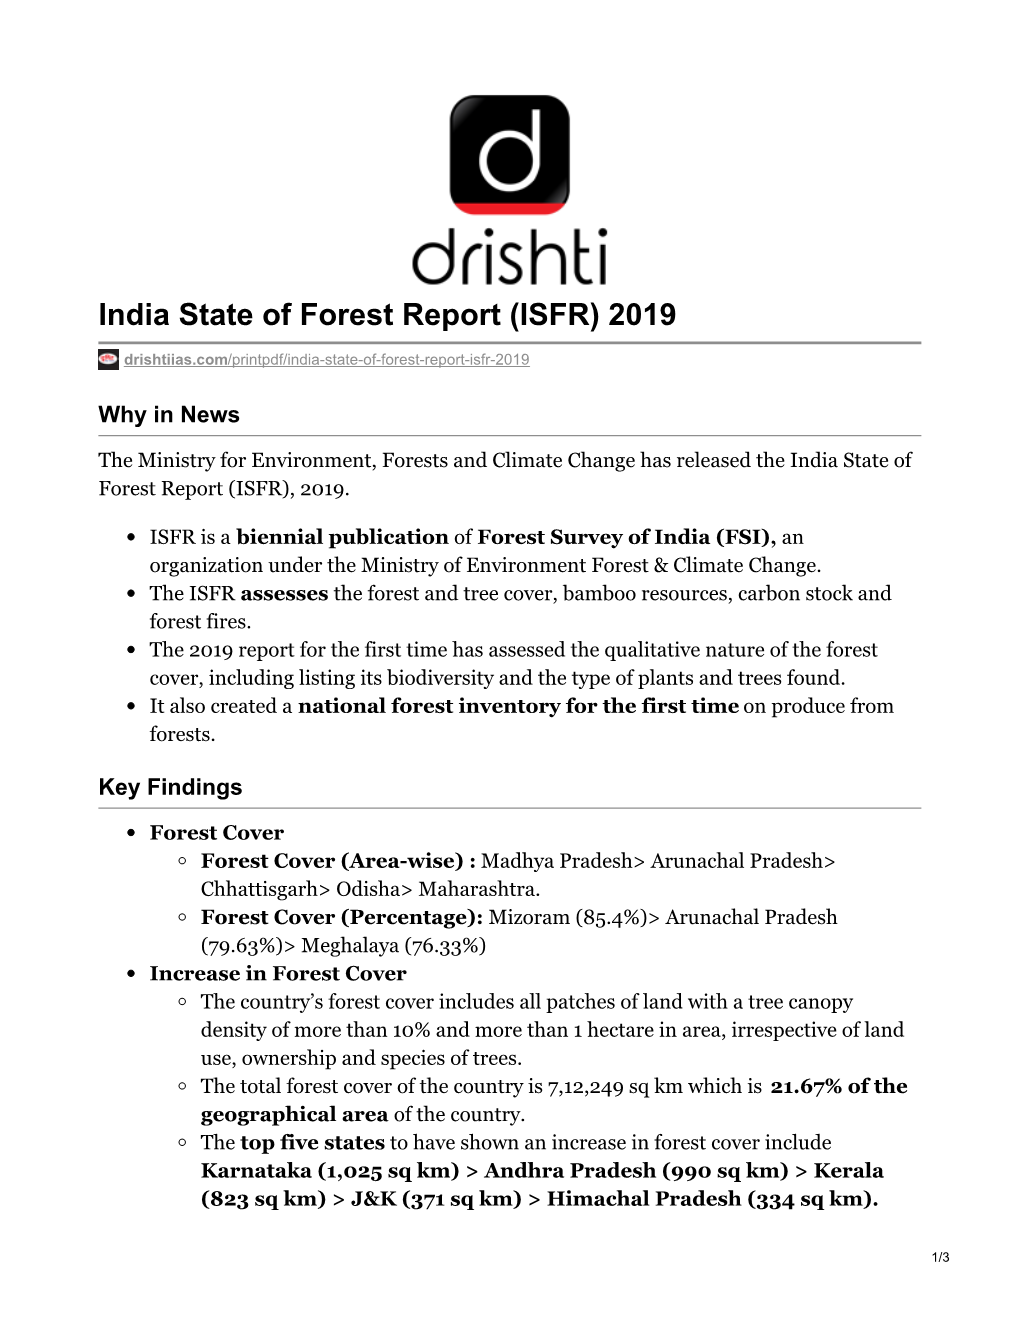 India State of Forest Report (ISFR) 2019